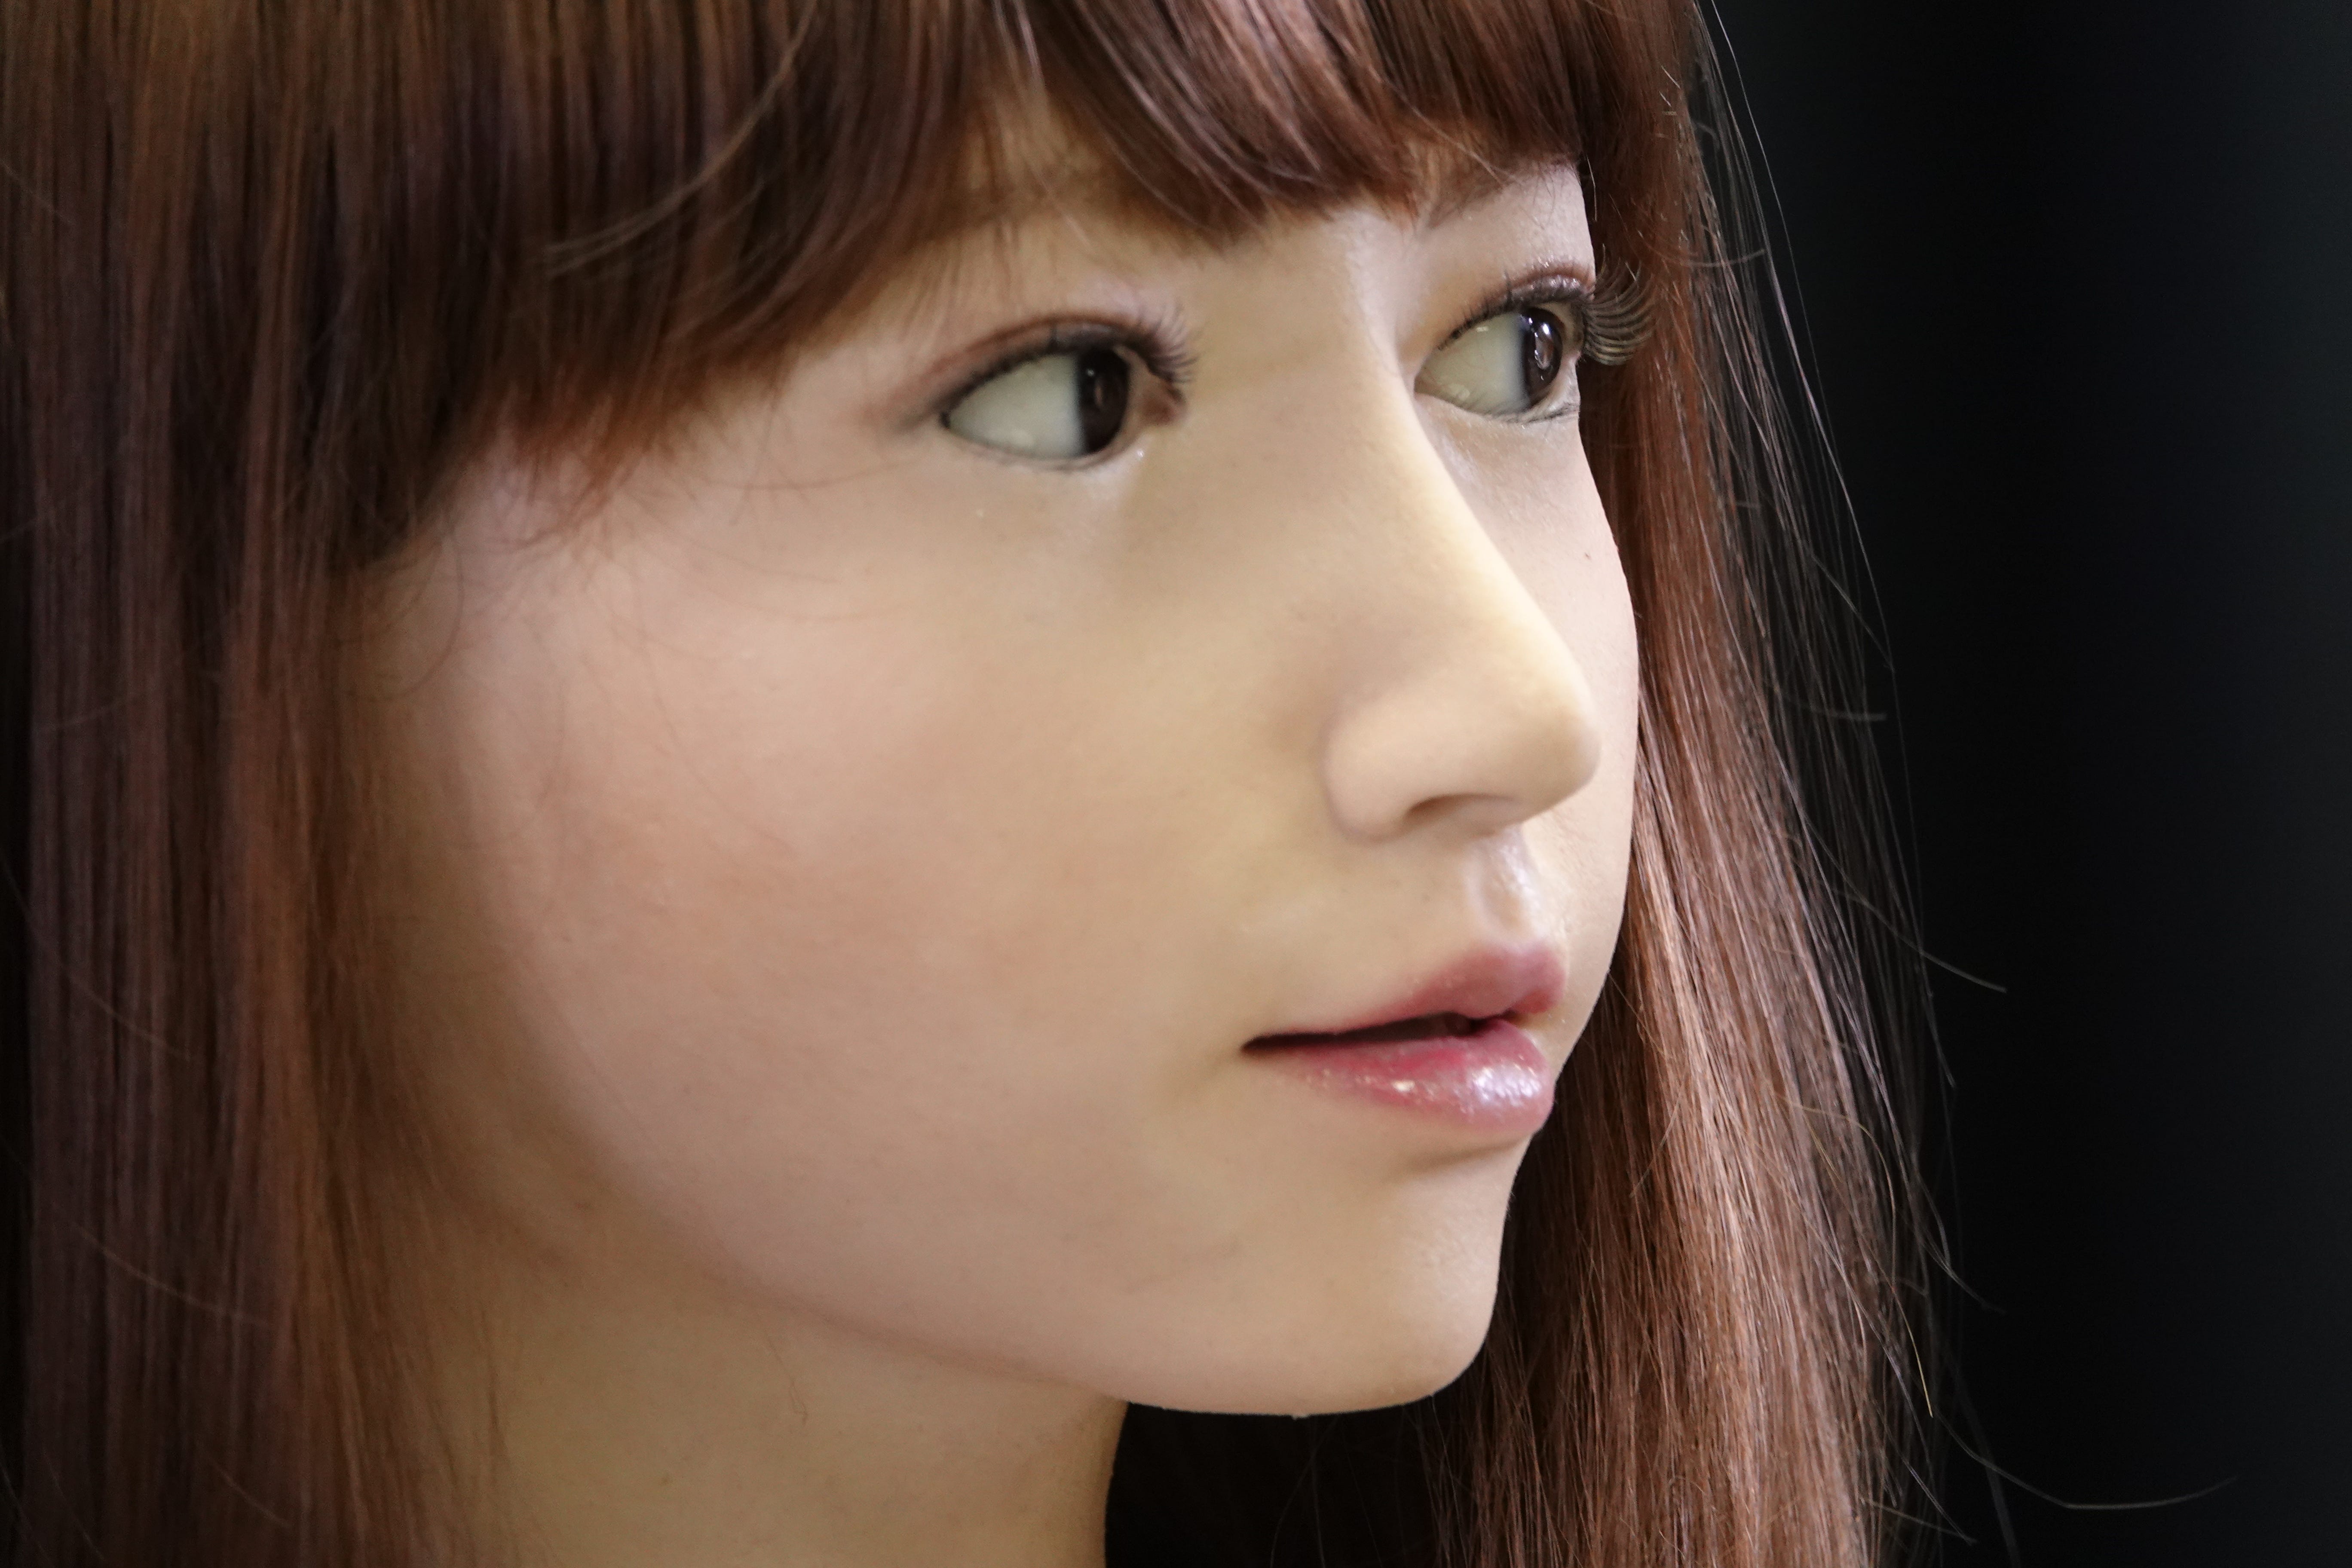 Jefferson Grahams interview with a Japanese robot image